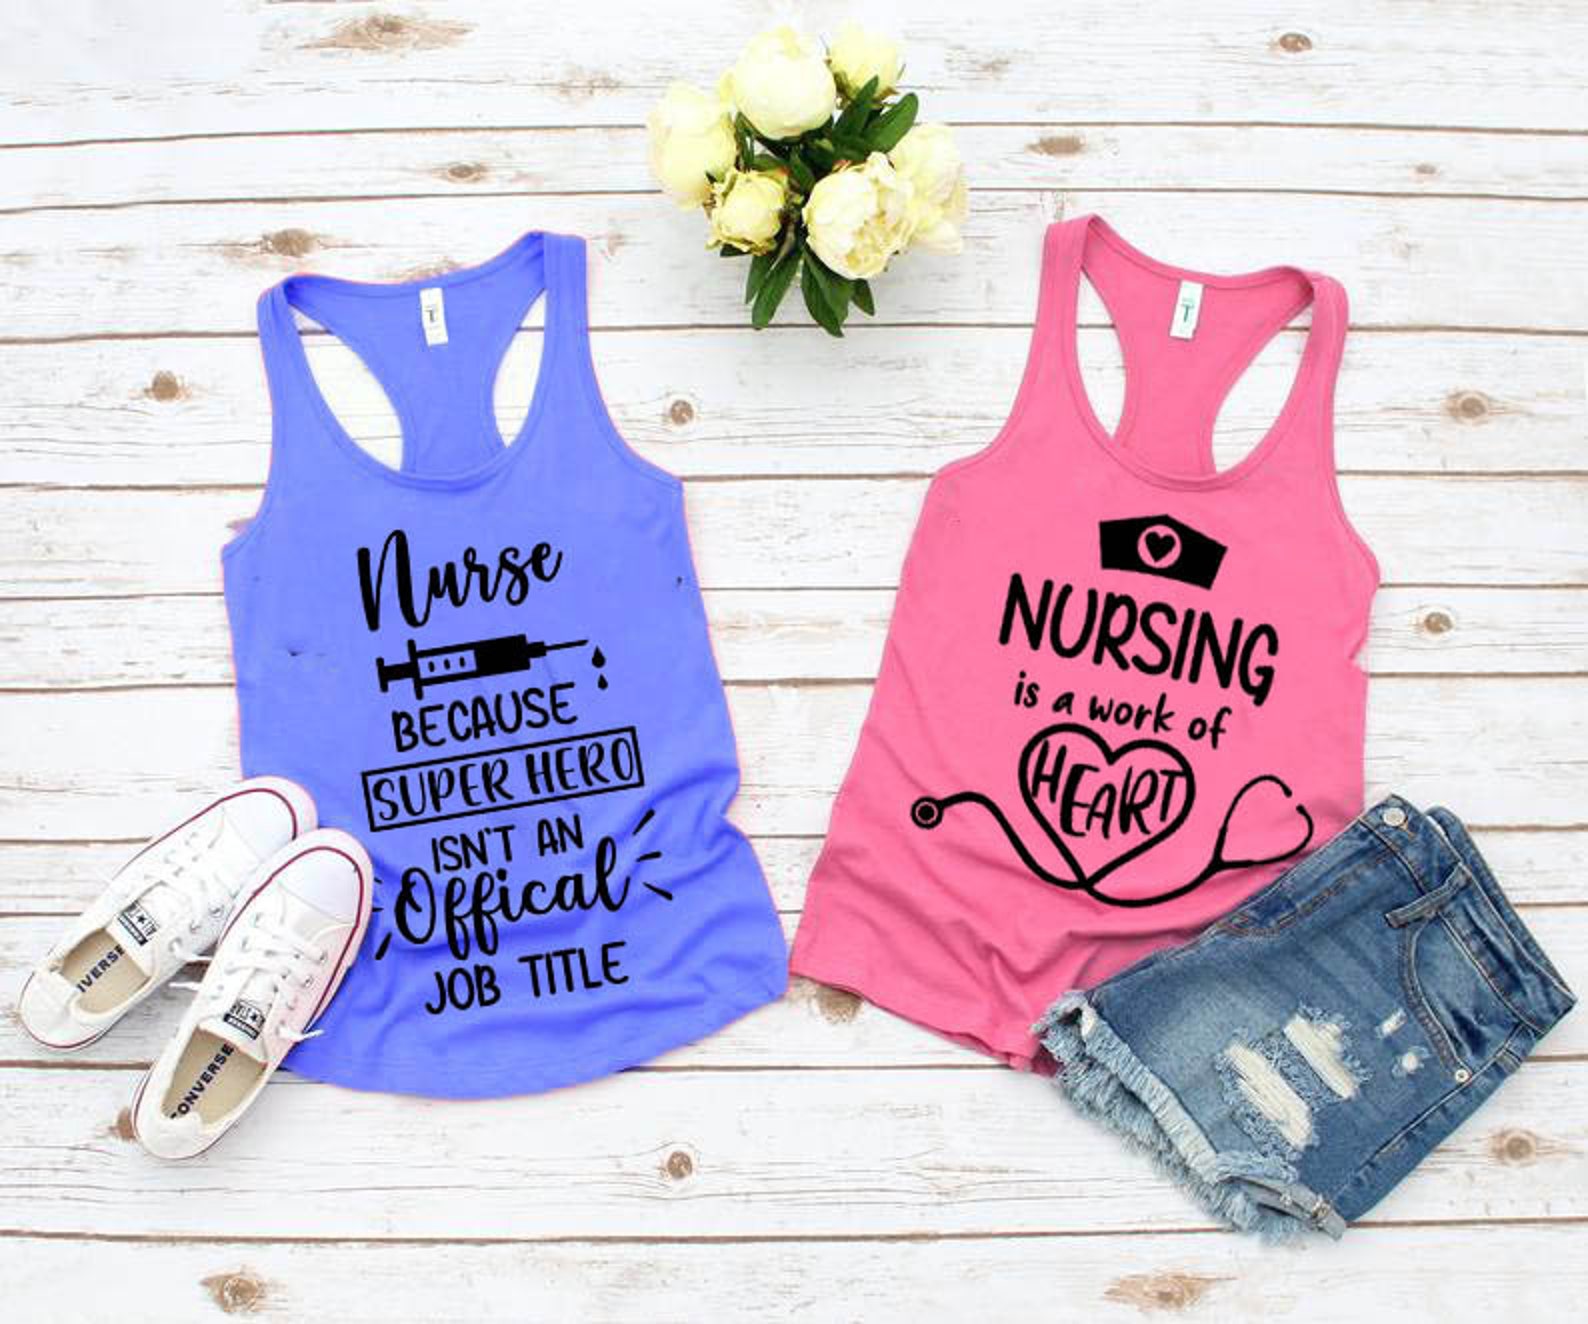 Two t-shirts with nurse illustration.